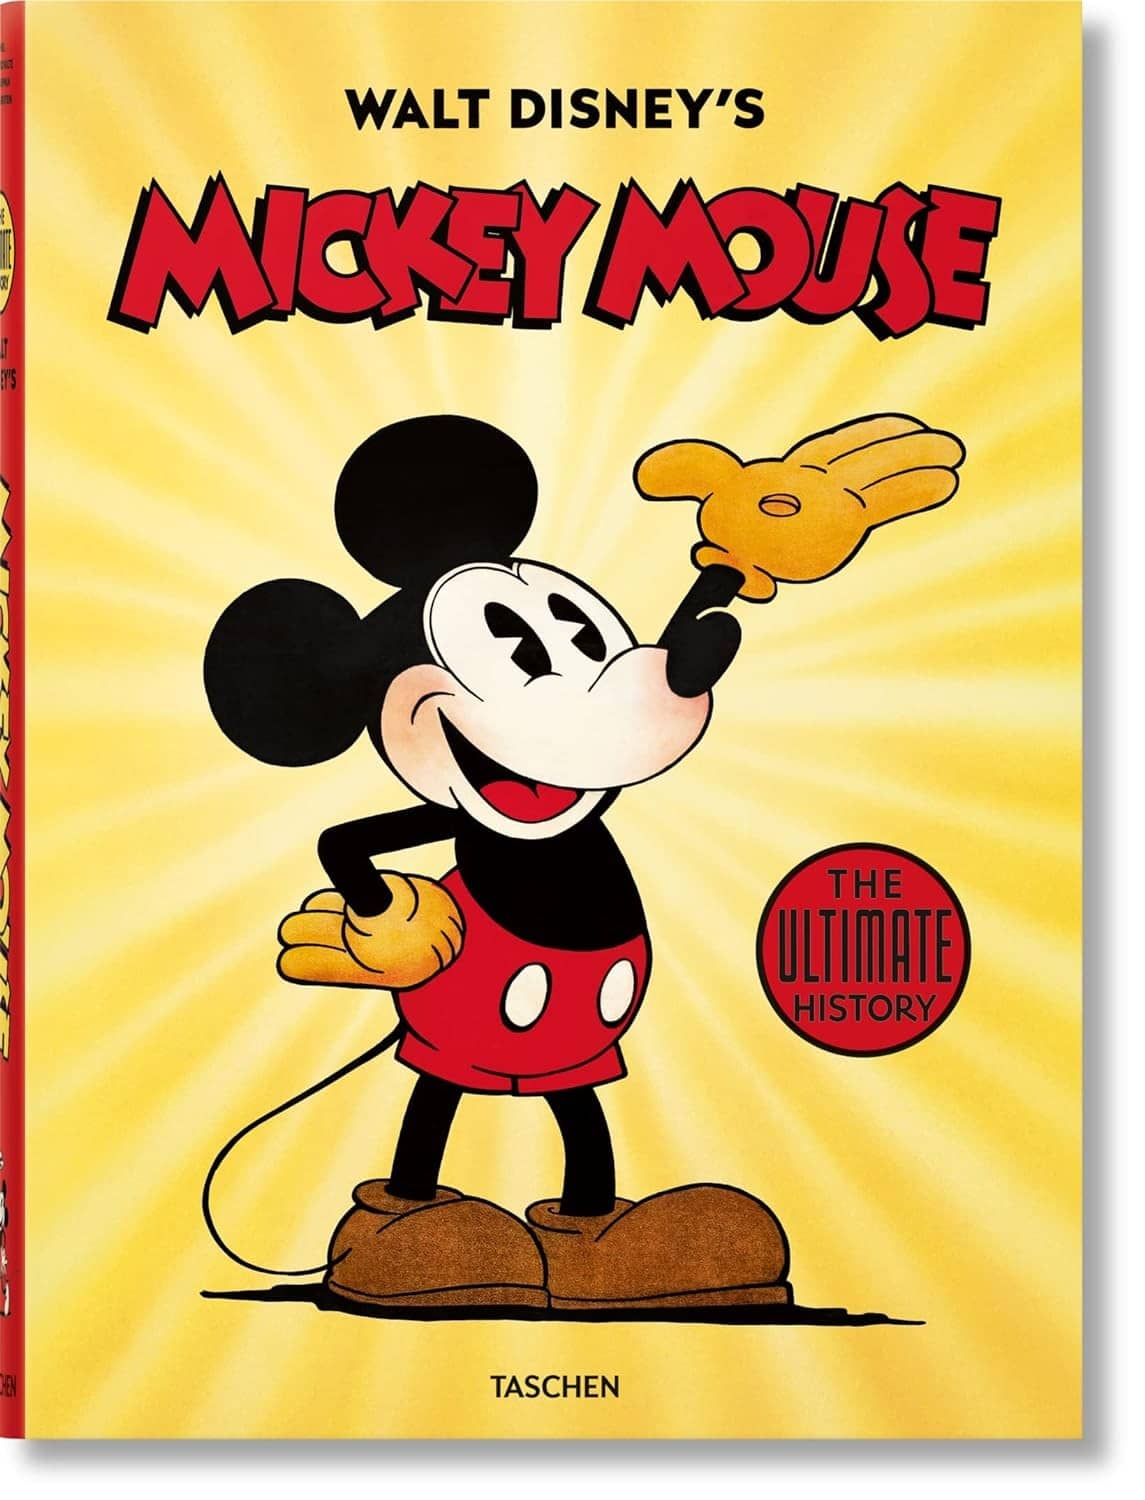 17418-walt-disney-s-mickey-mouse-the-ultimate-history-71s94maoall-sl1500 (2)